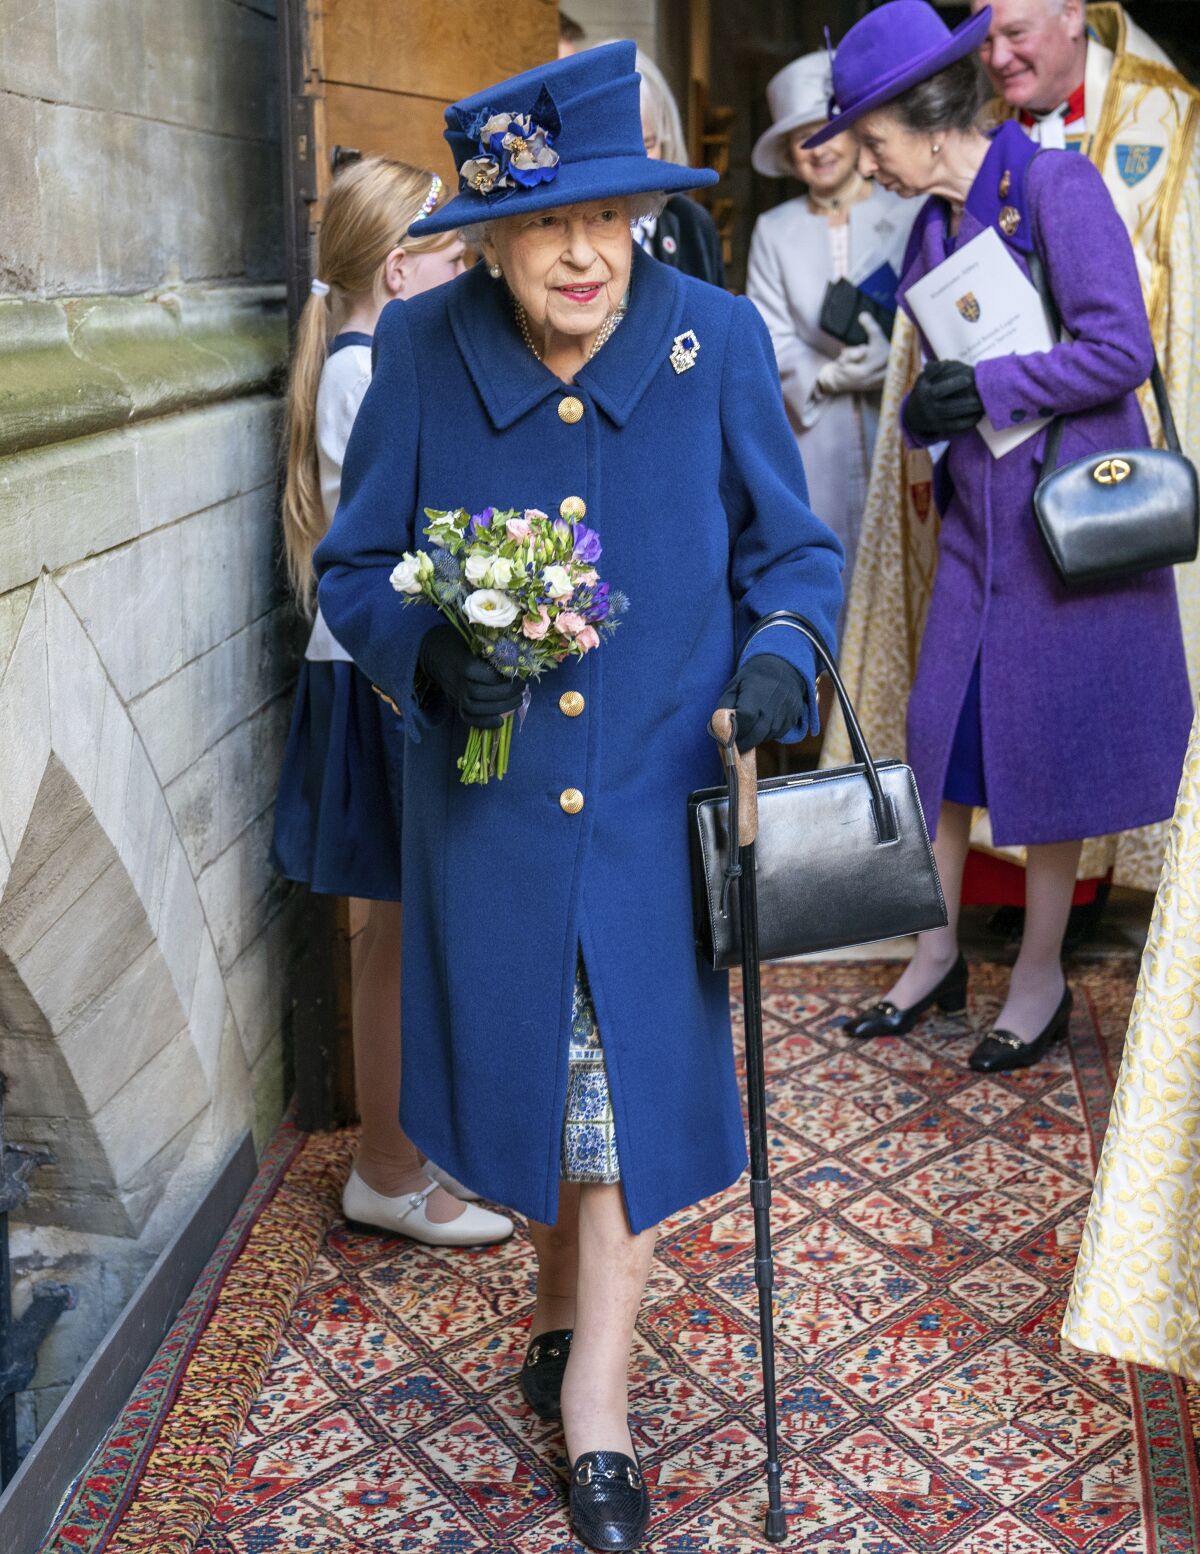 Britain's Queen Elizabeth II, followed by Britain's Princess Anne, right, arrives to attend a Service of Thanksgiving to mark the Centenary of the Royal British Legion at Westminster Abbey, in London, Tuesday, Oct. 12, 2021. (Arthur Edwards/Pool Photo via AP)